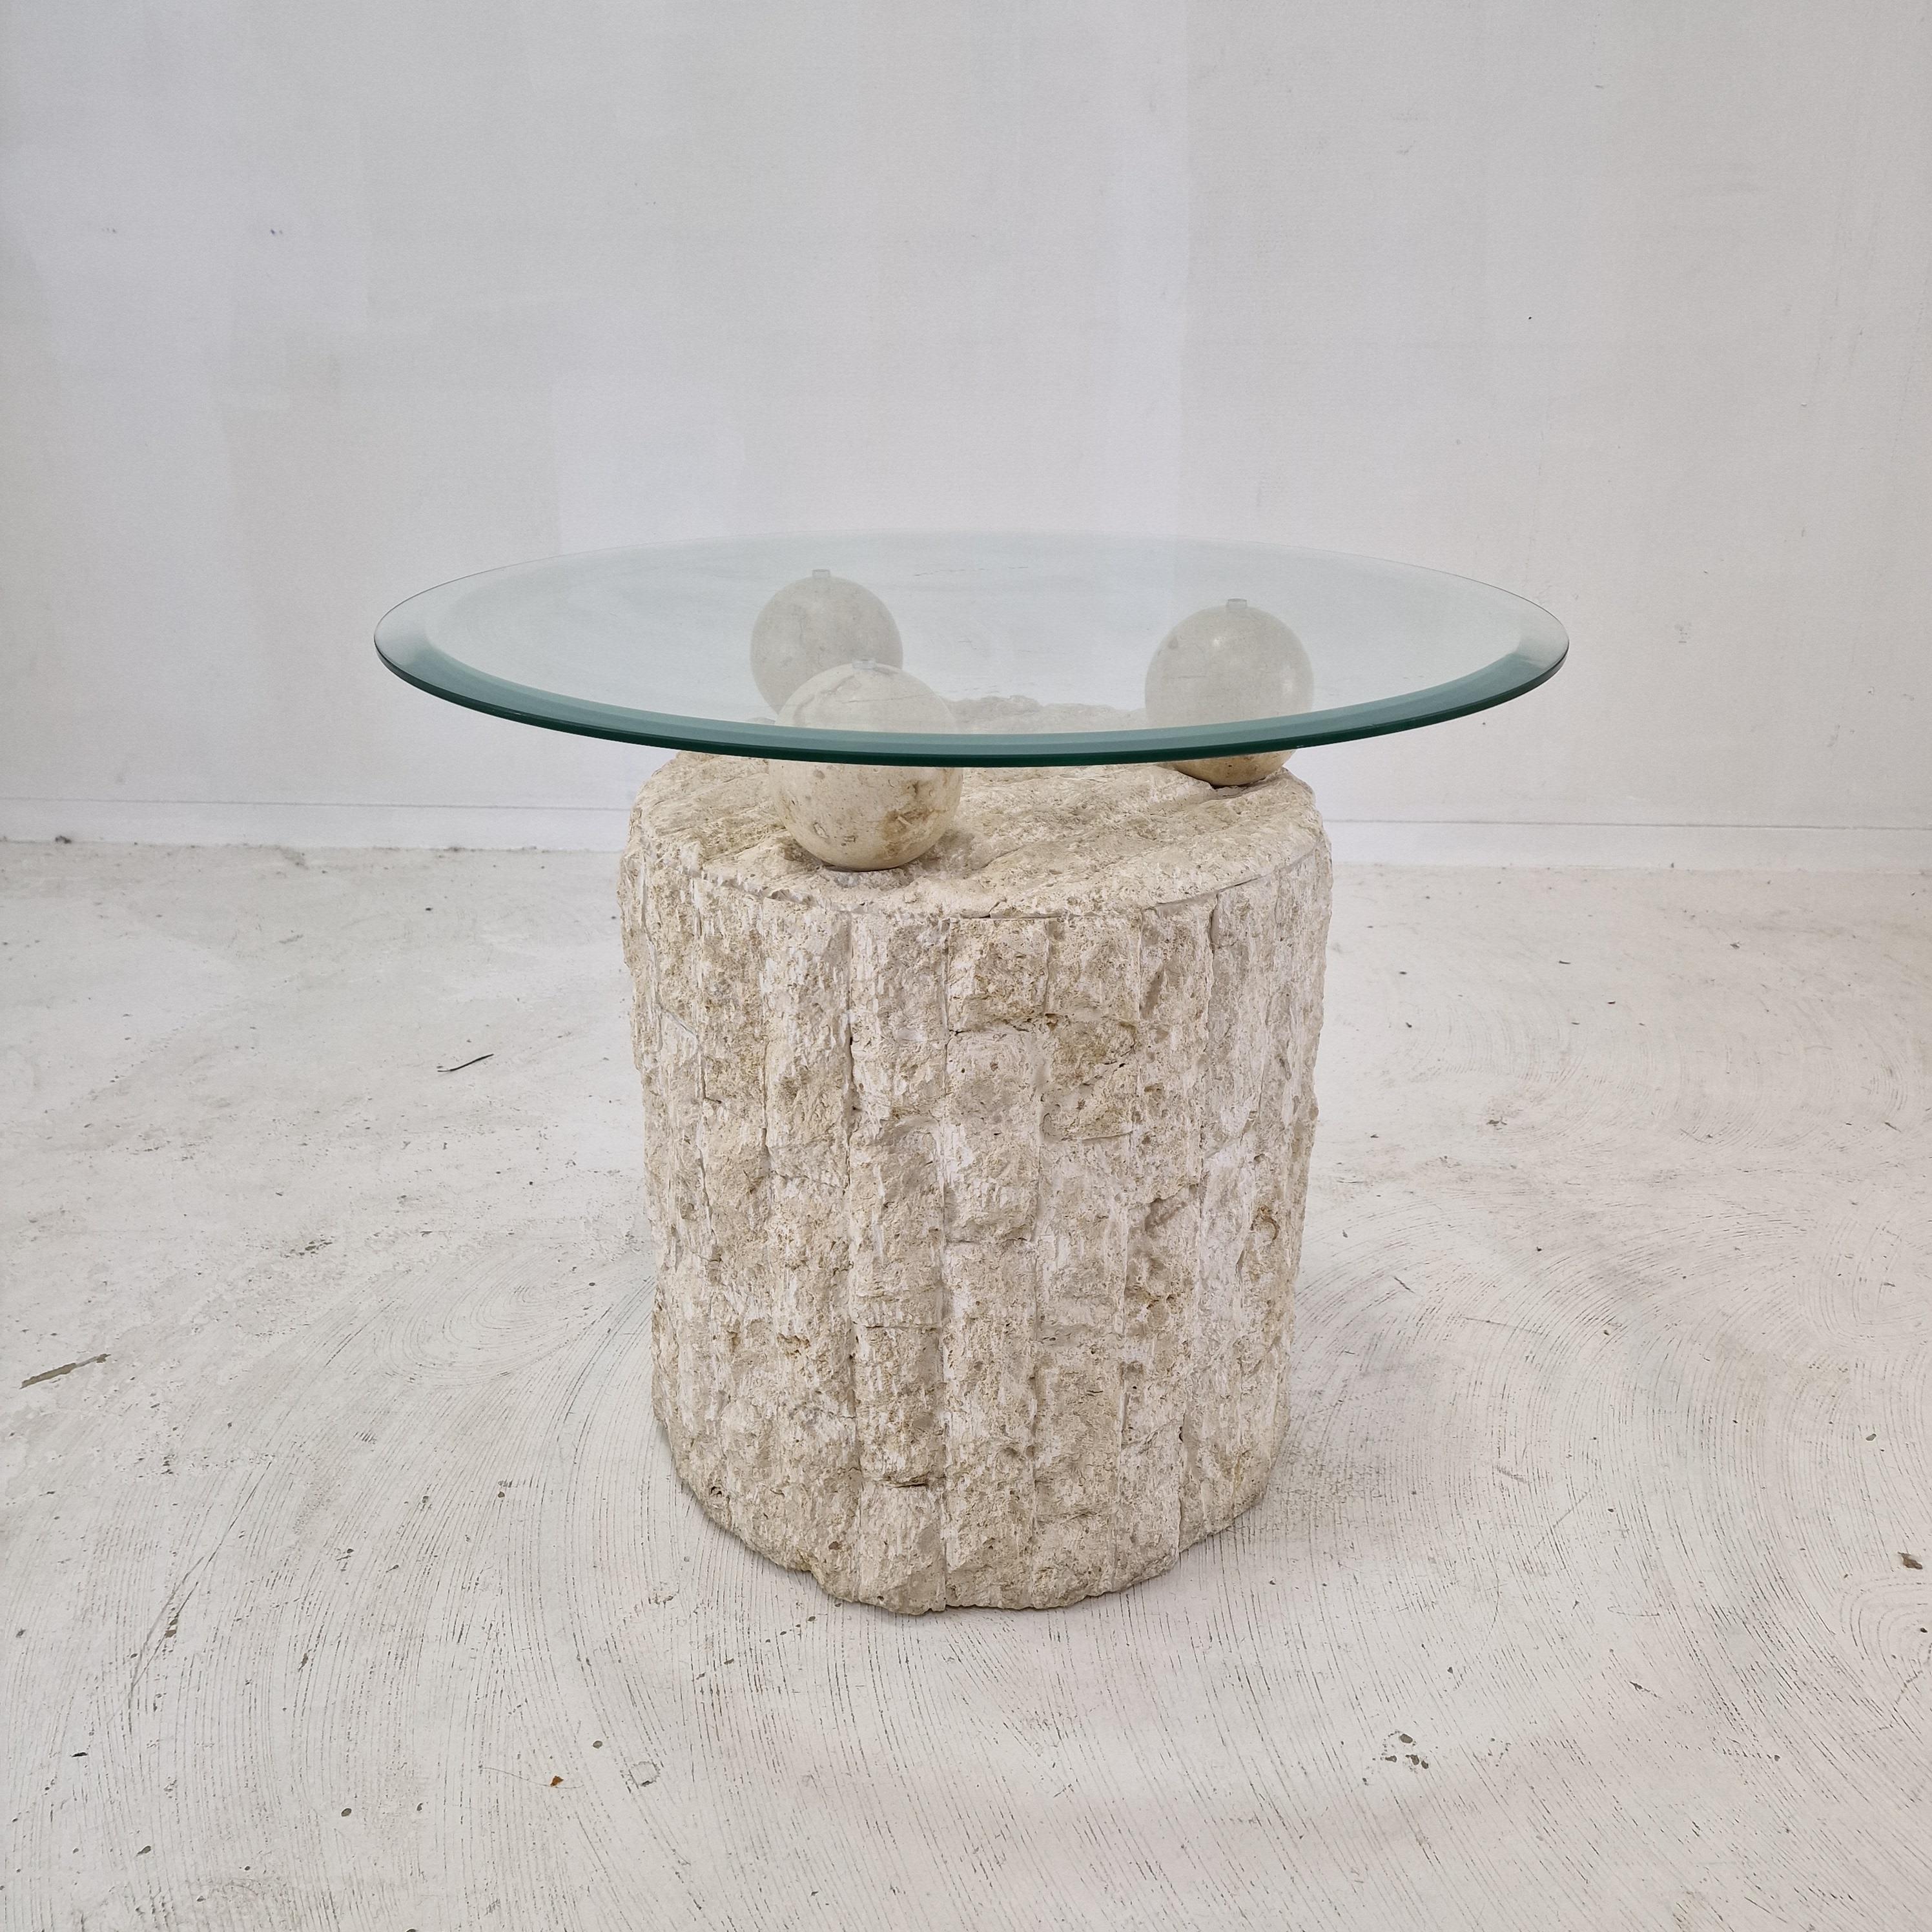 Lovely Postmodern 1980s design, coffee or side table by Magnussen Ponte.

The base of this cute table is made of rough edged brick motif Mactan stone or Fossil Stone. 

Three stone balls holding the removable circular glass plate.
The facet cut